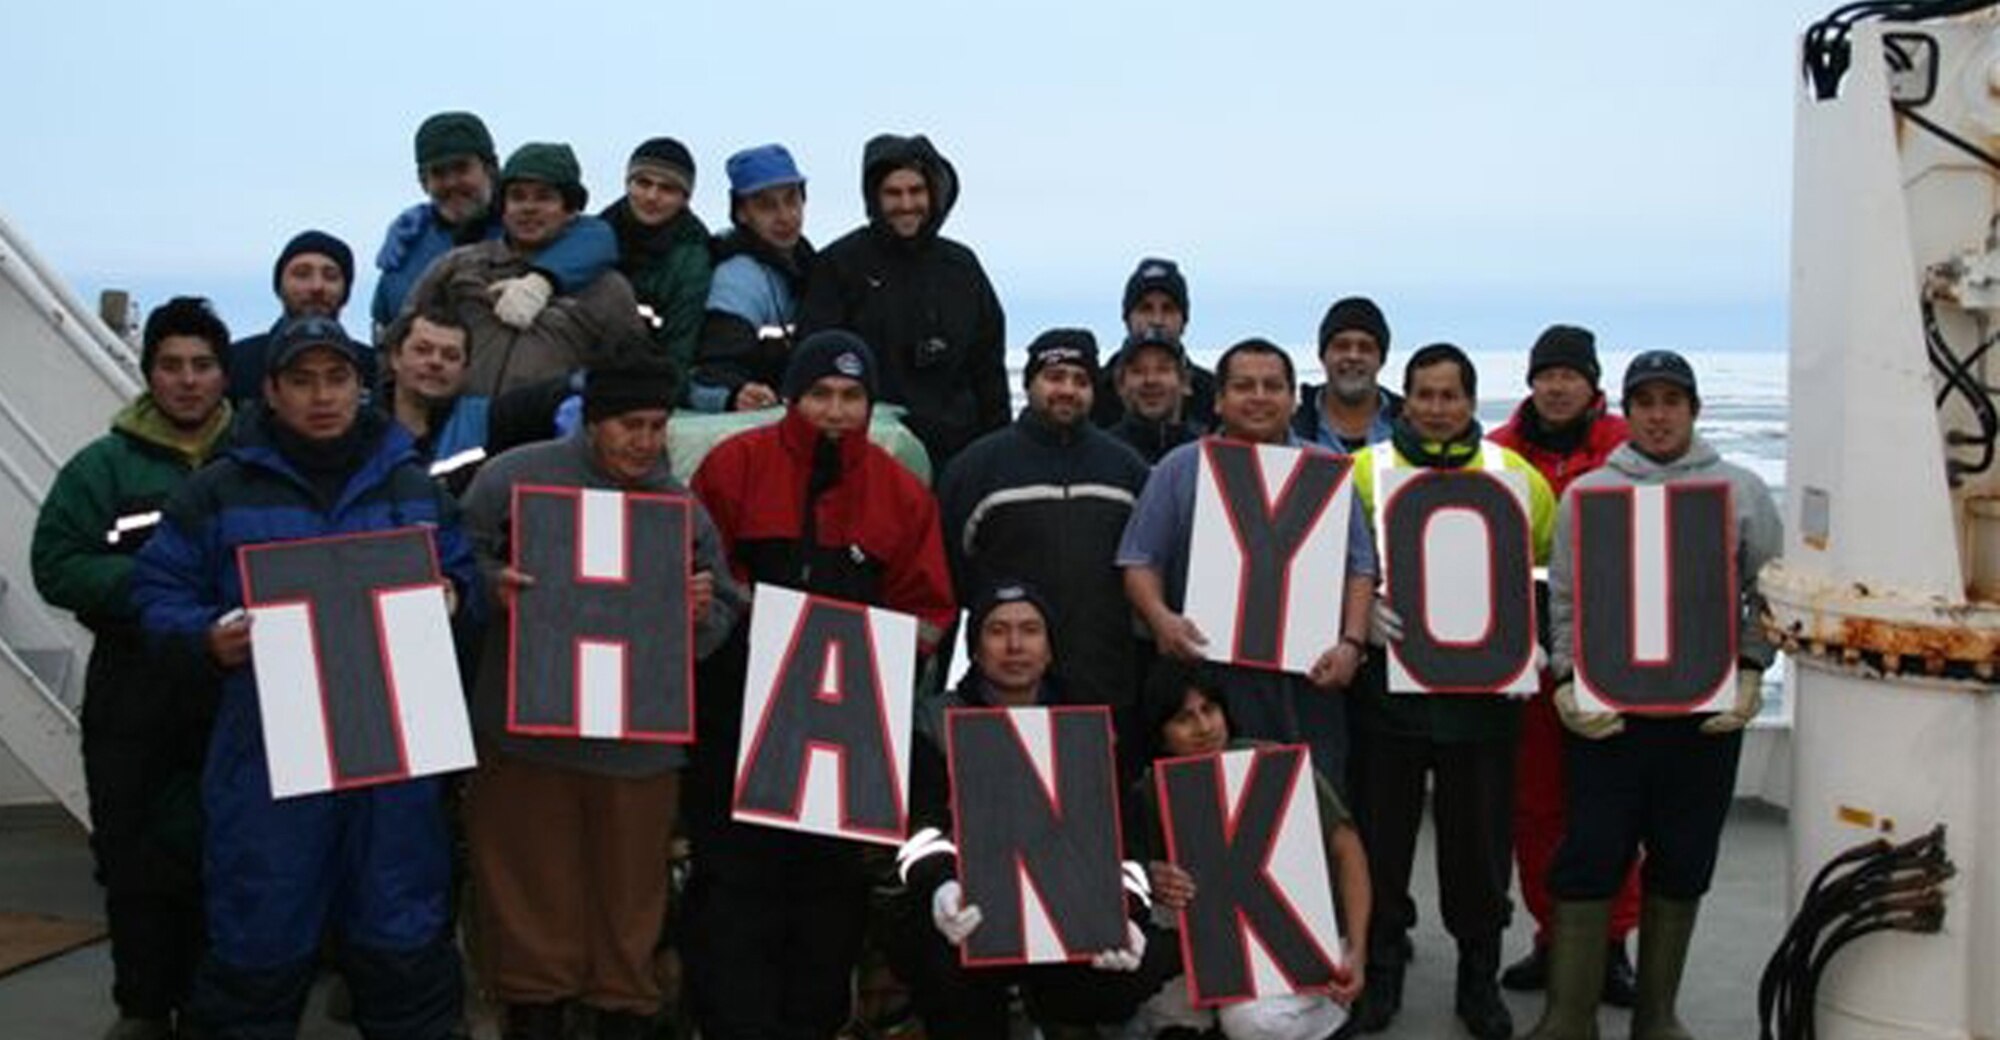 A grateful crew of the Argos Georgia show its appreciation after a McChord C-17 flown by Reserve and active-duty Airmen airdropped a new engine and supplies to the stranded fishing trawler in the Antarctic. (Courtesy photo/Argos Georgia, Ltd.)
